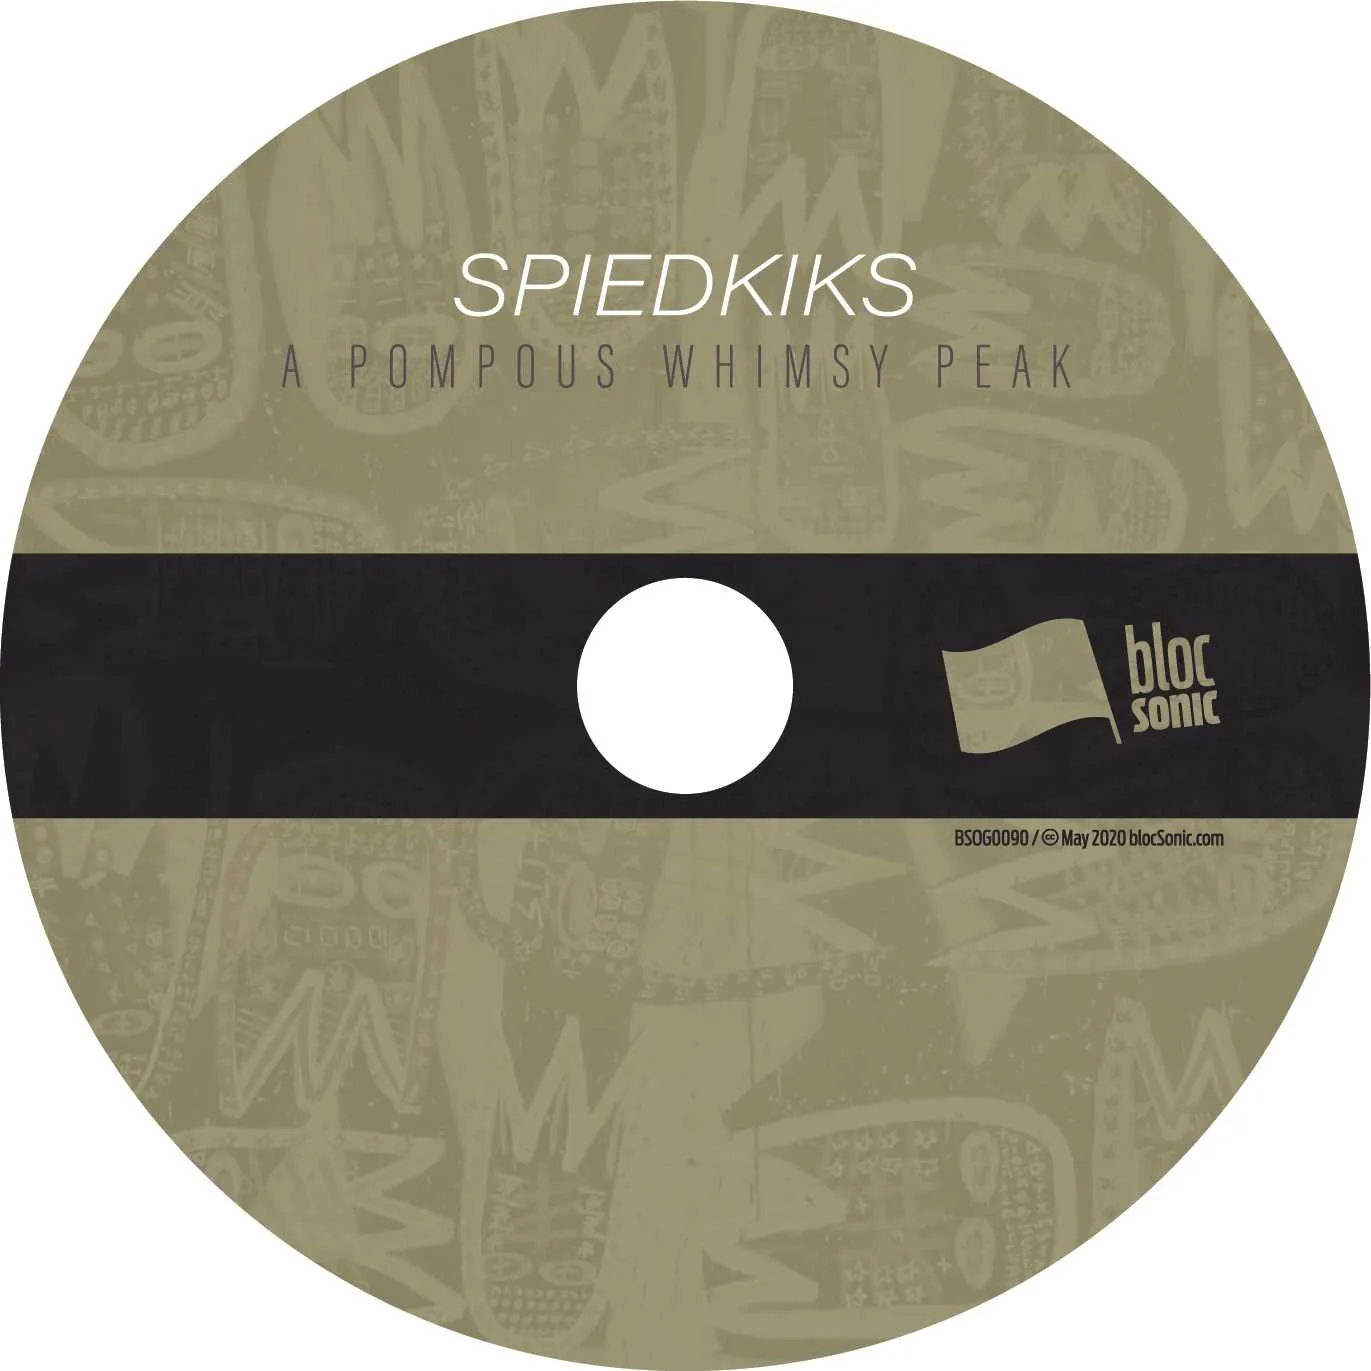 Album disc for “A Pompous Whimsy Peak” by Spiedkiks